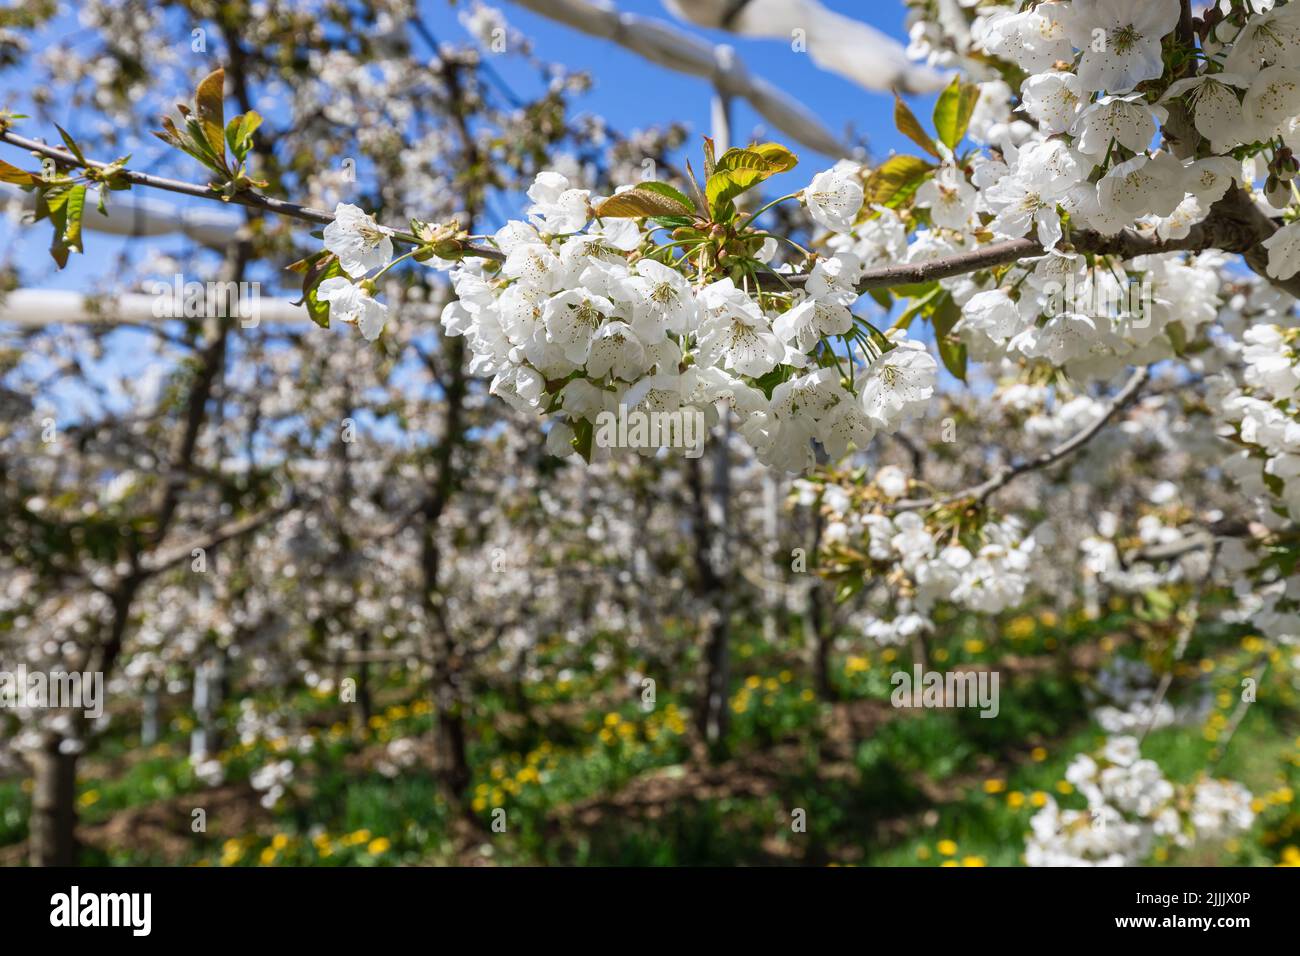 Young apple-tree bushes abounding in blooming inflorescences open from under a canopy towards the spring sky, Val di Non, Trentino, Italy Stock Photo